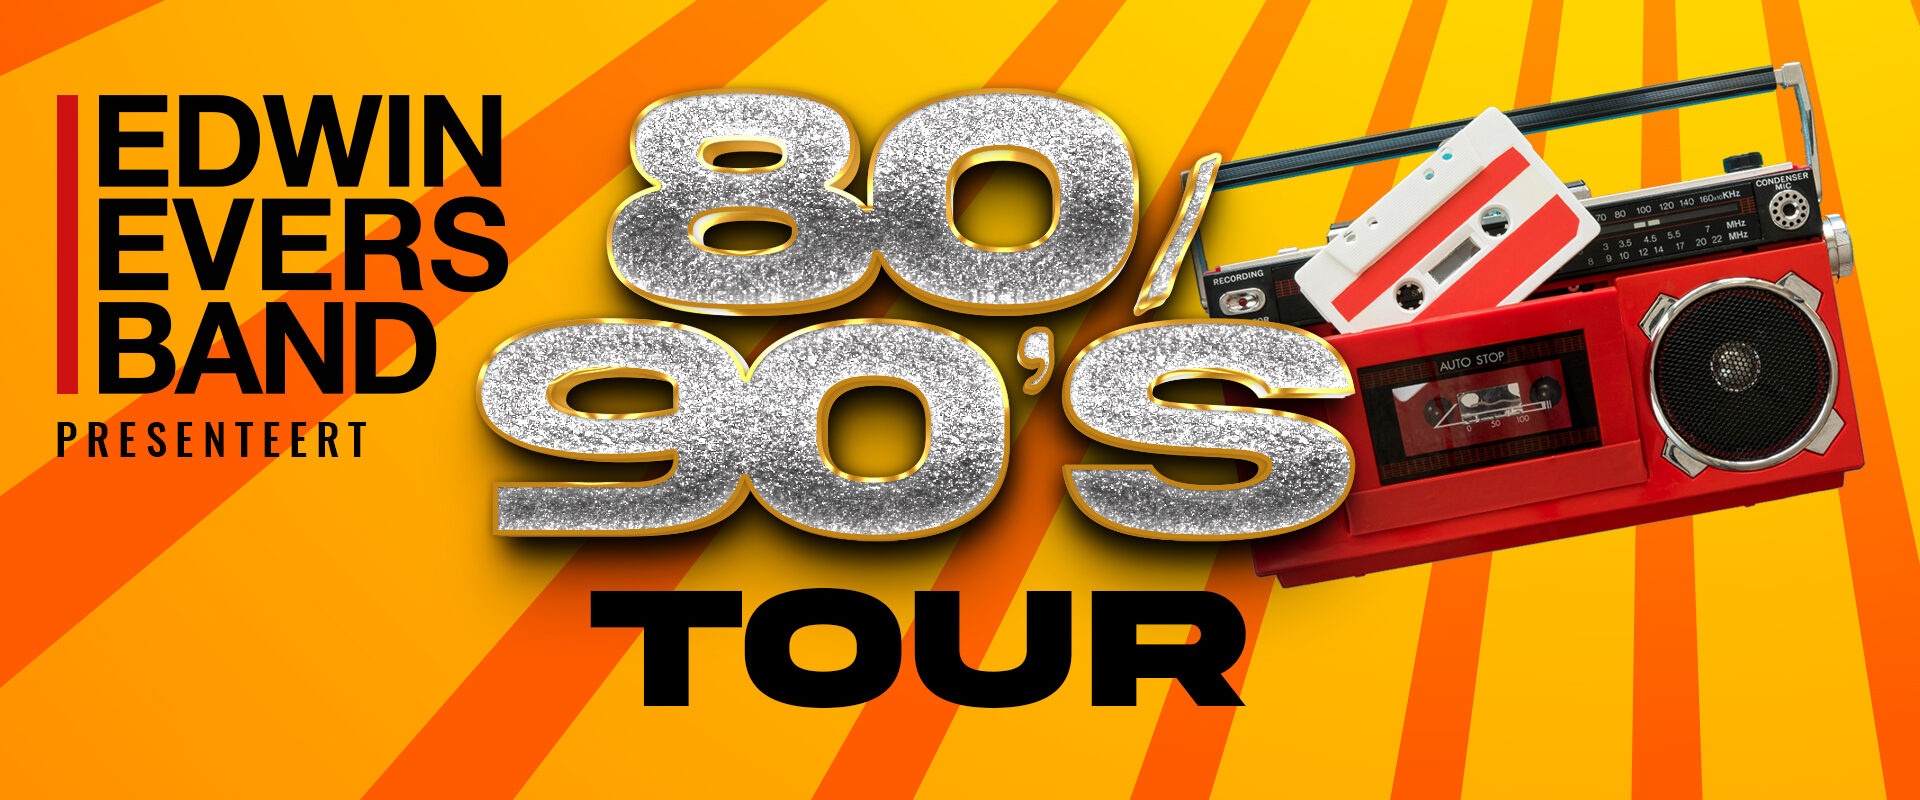 Edwin Evers Band 80’s & 90’s TOUR